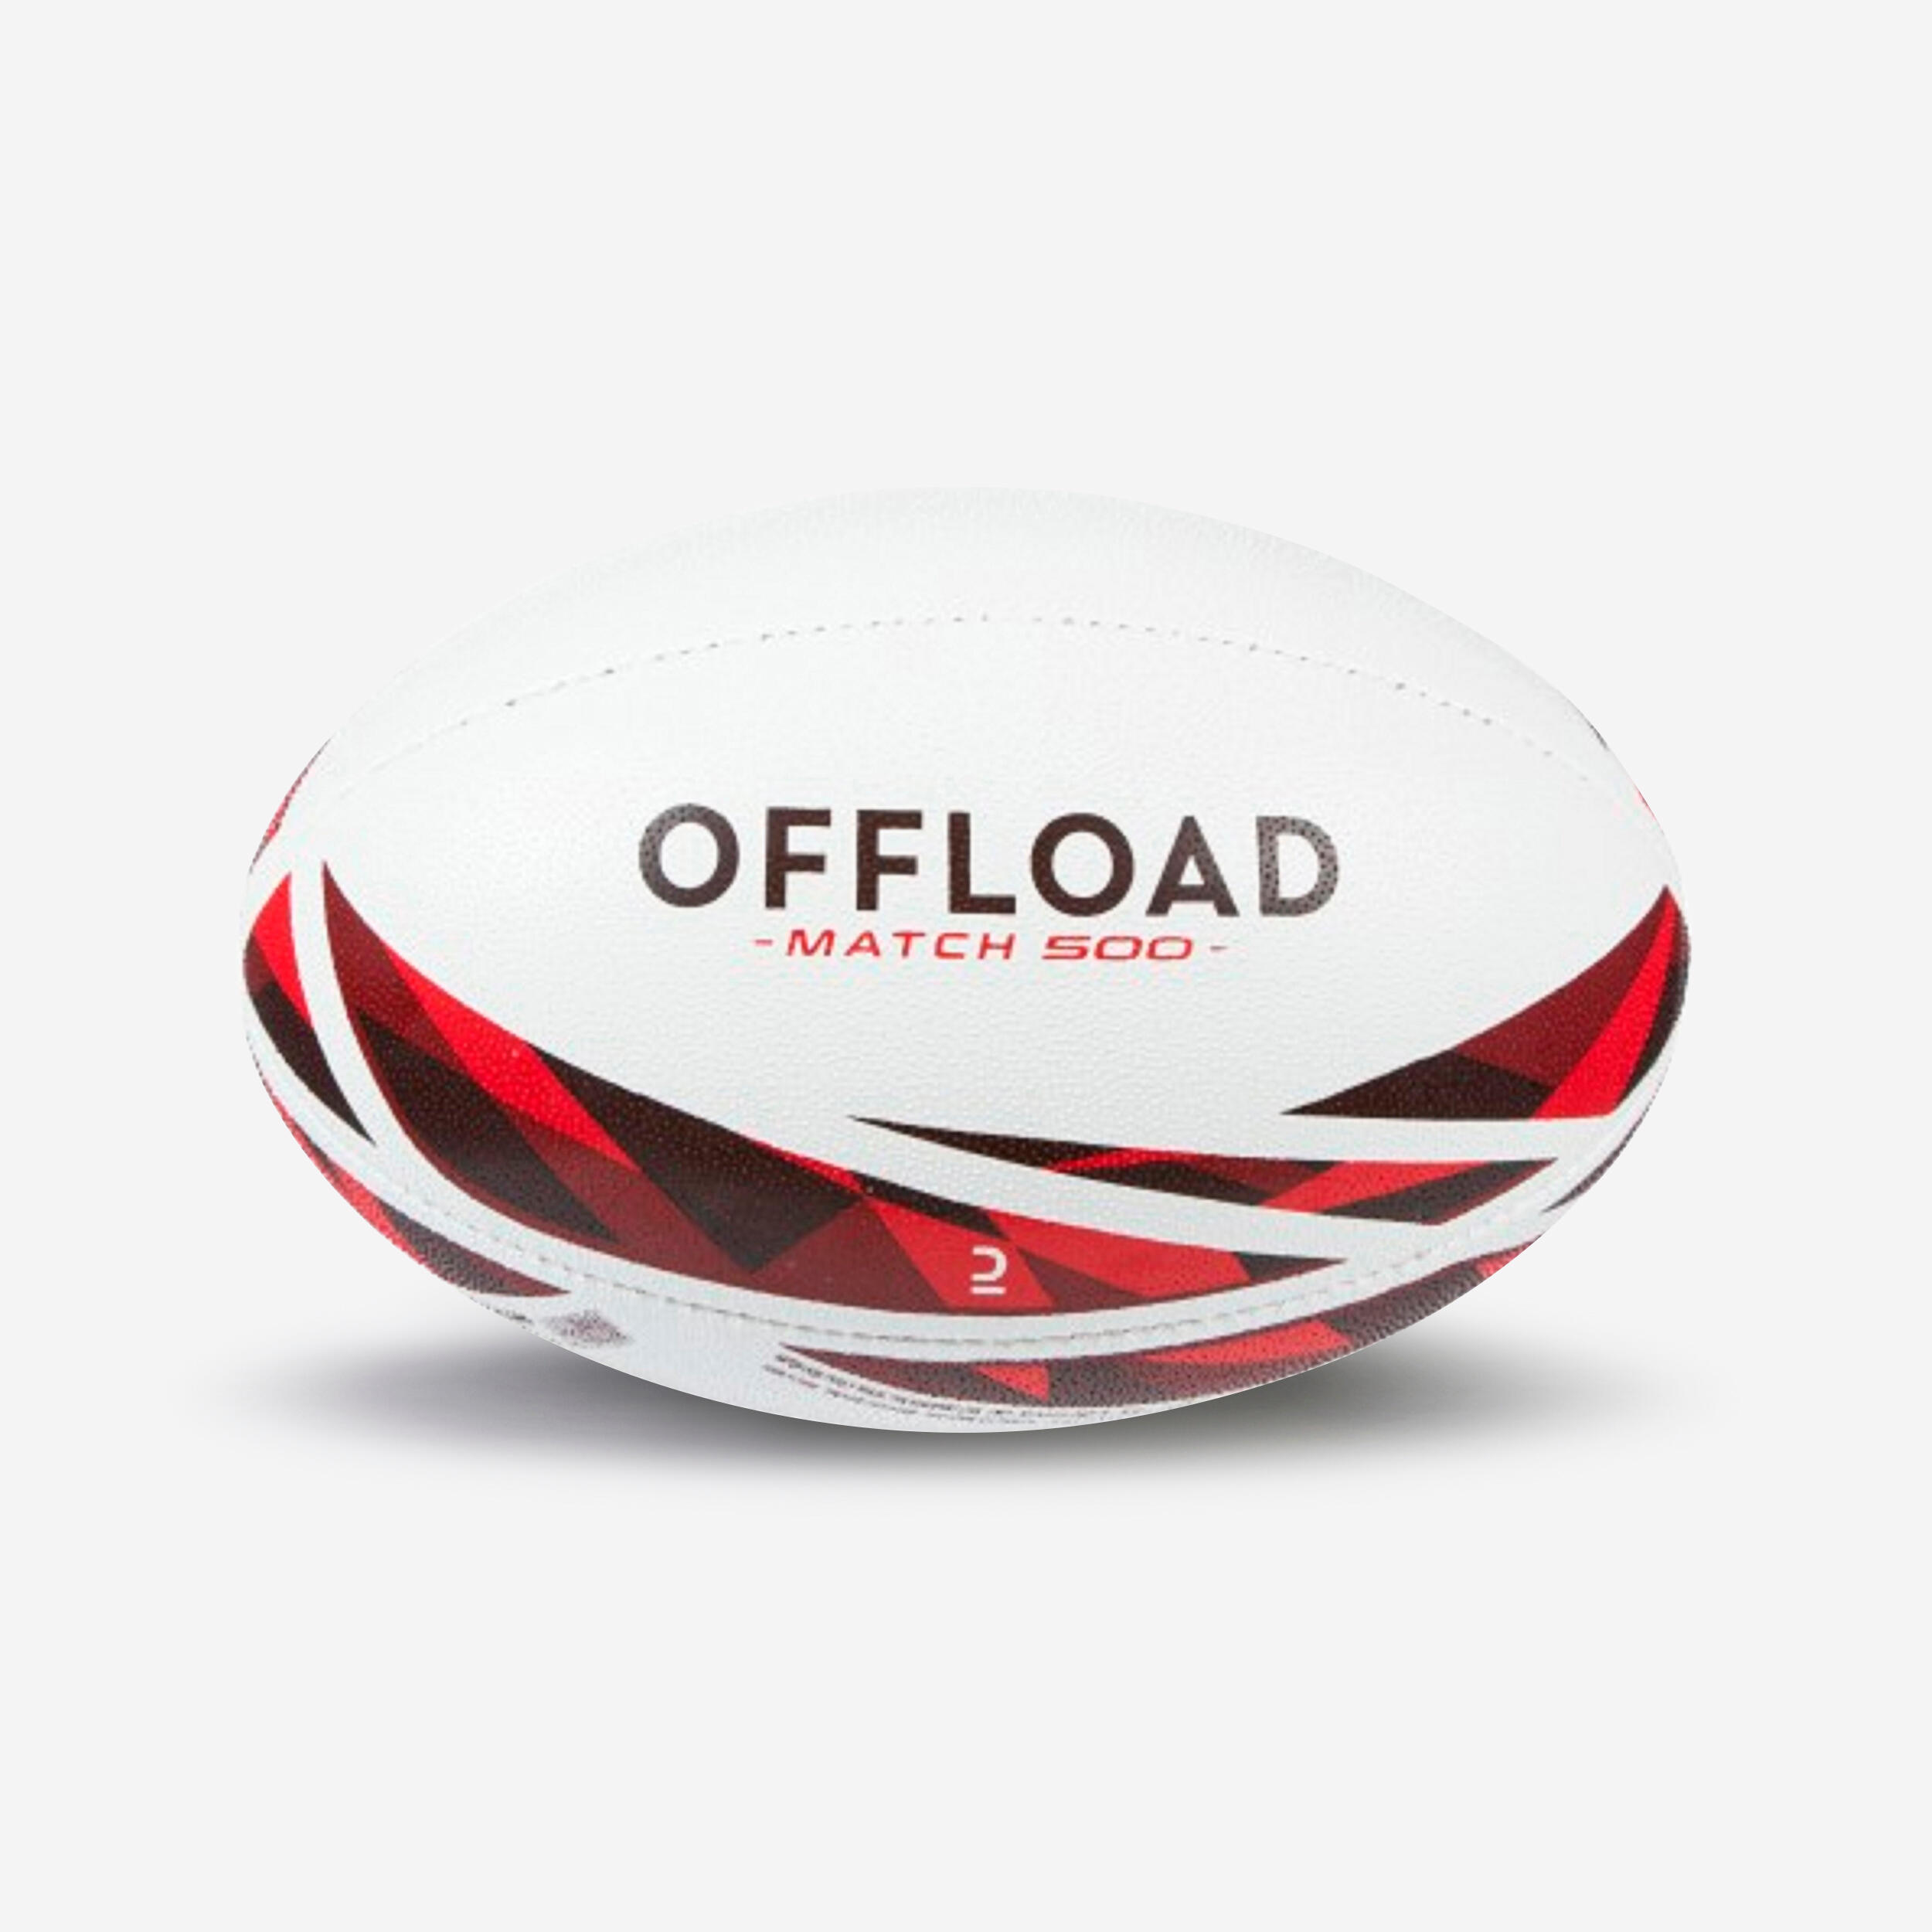 OFFLOAD Rugby Ball R500 Match Size 4 - Red/White